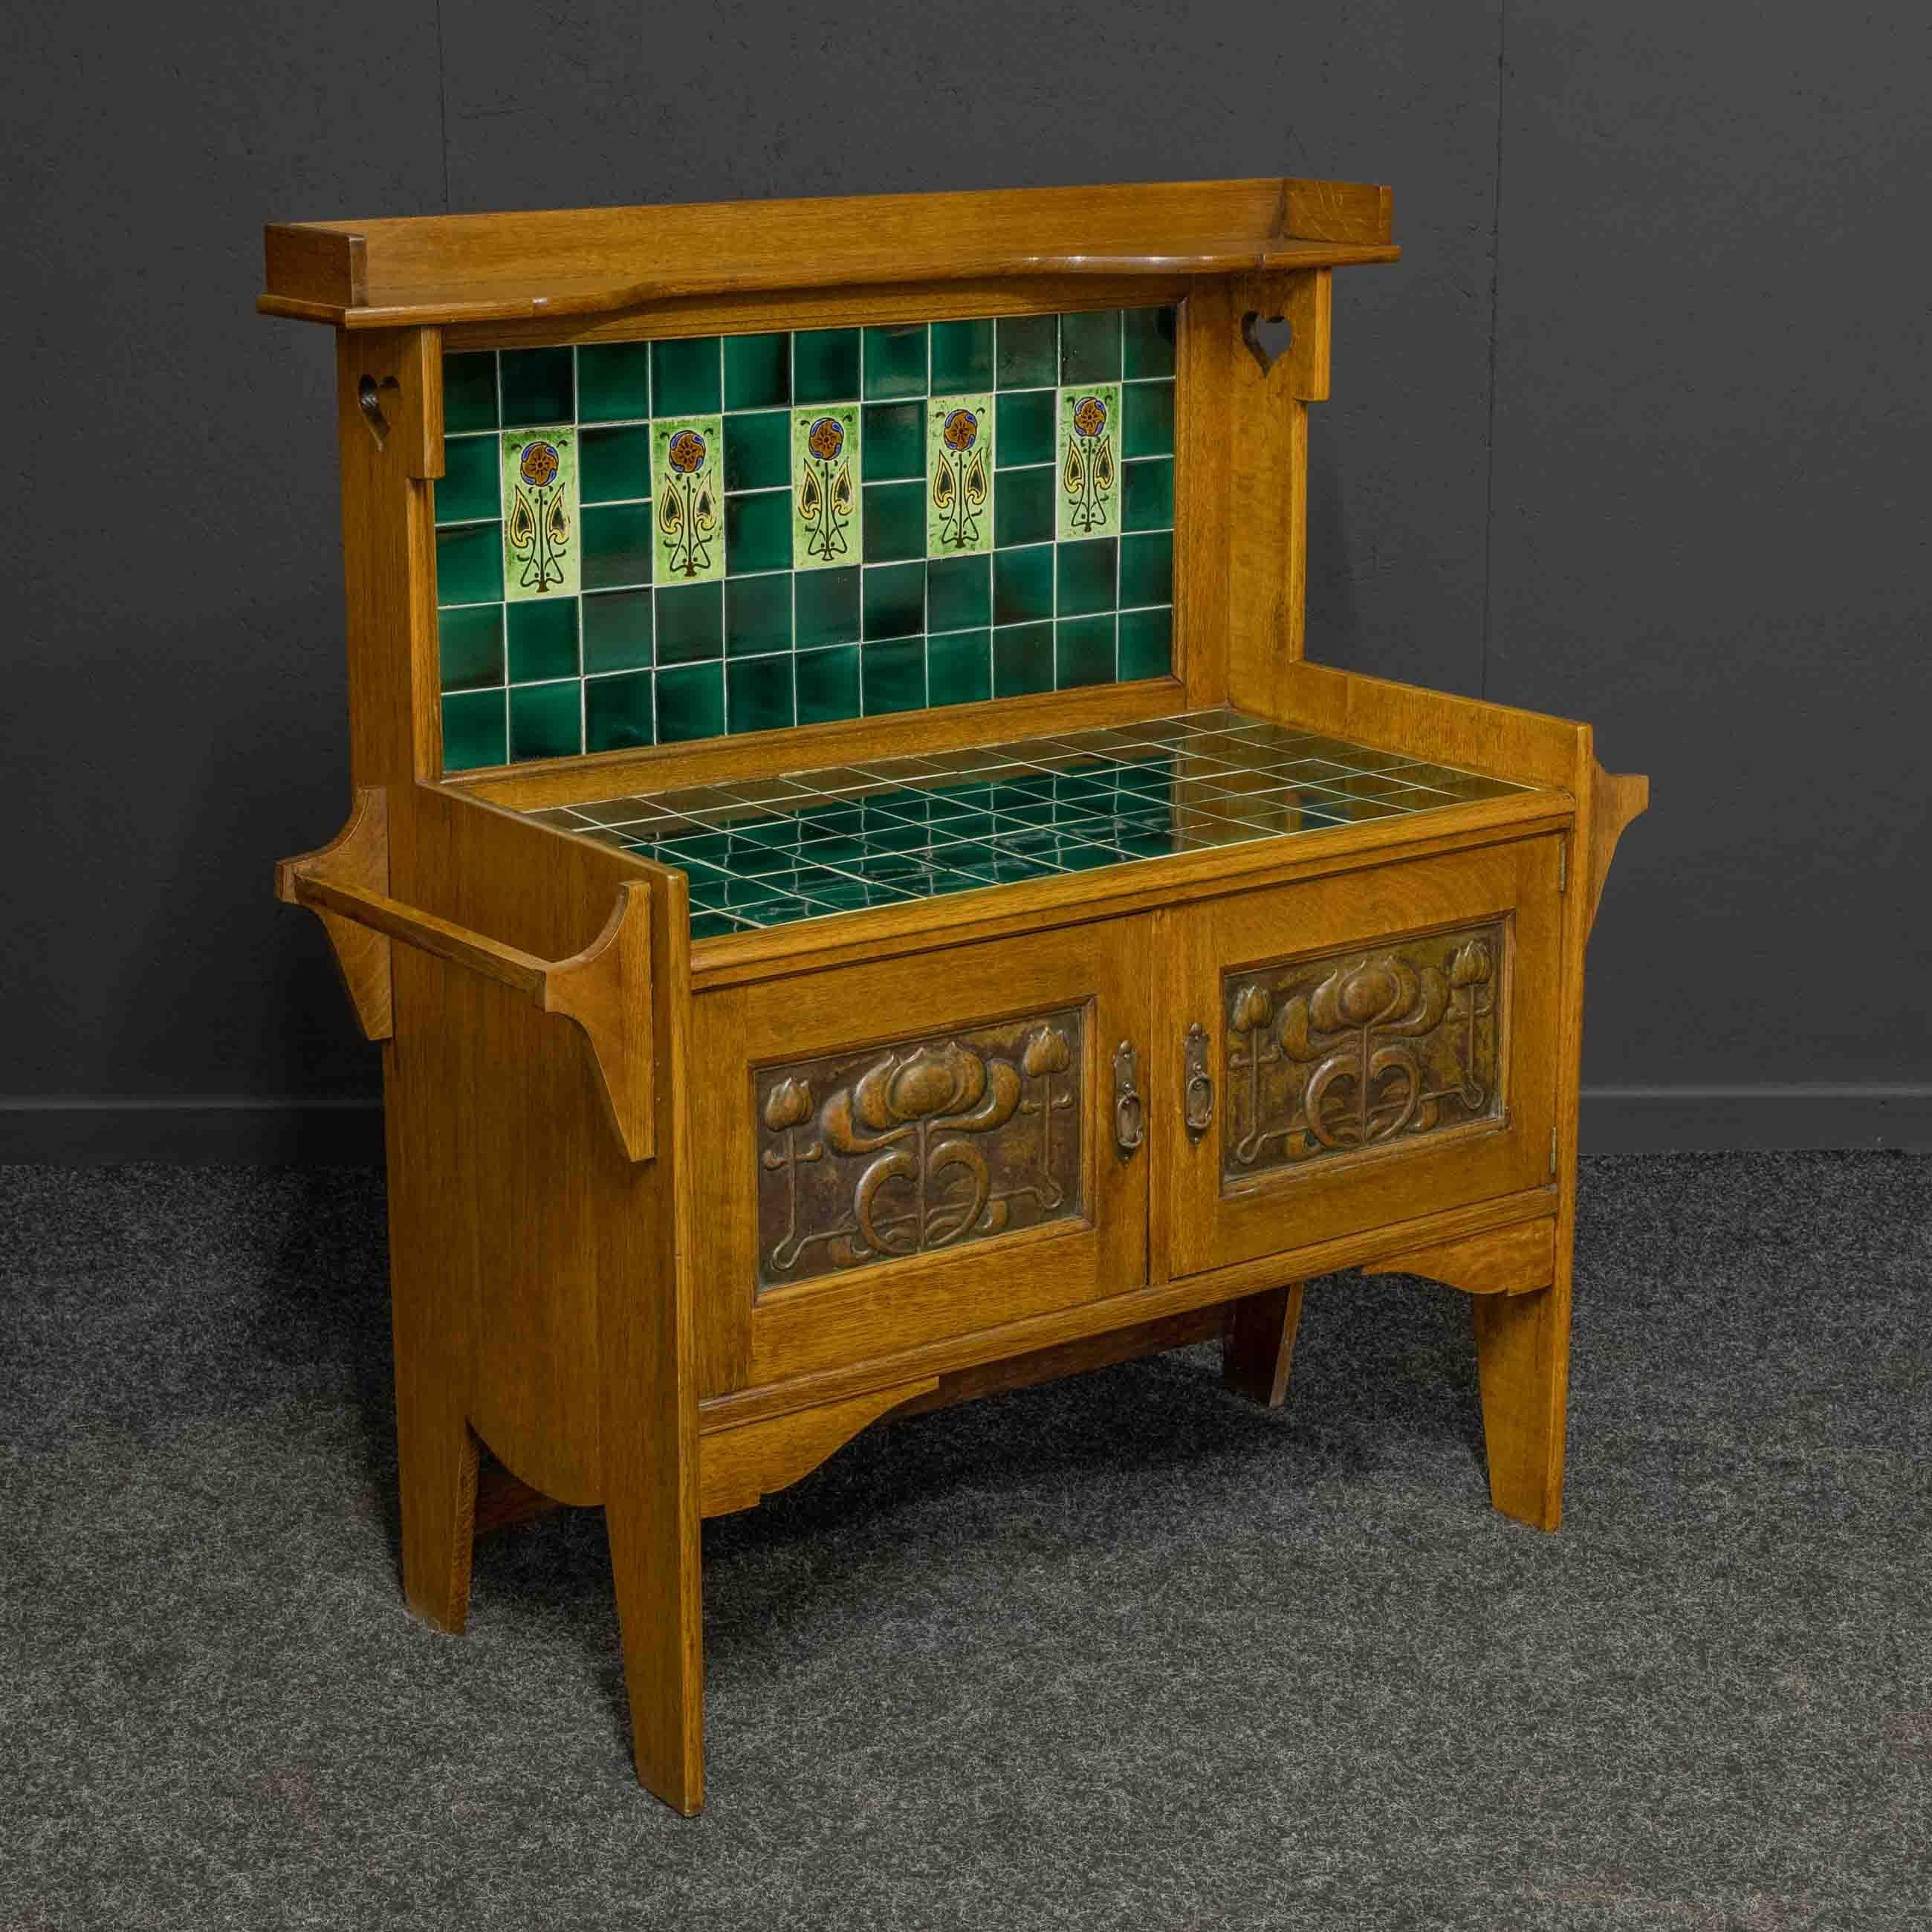 An absolutely stunning Arts and Crafts washstand from the late Victorian period. Made from solid oak with beautiful embossed copper panels to the pair of cupboard doors which also retain their original handles. The legs are cut from the solid sides